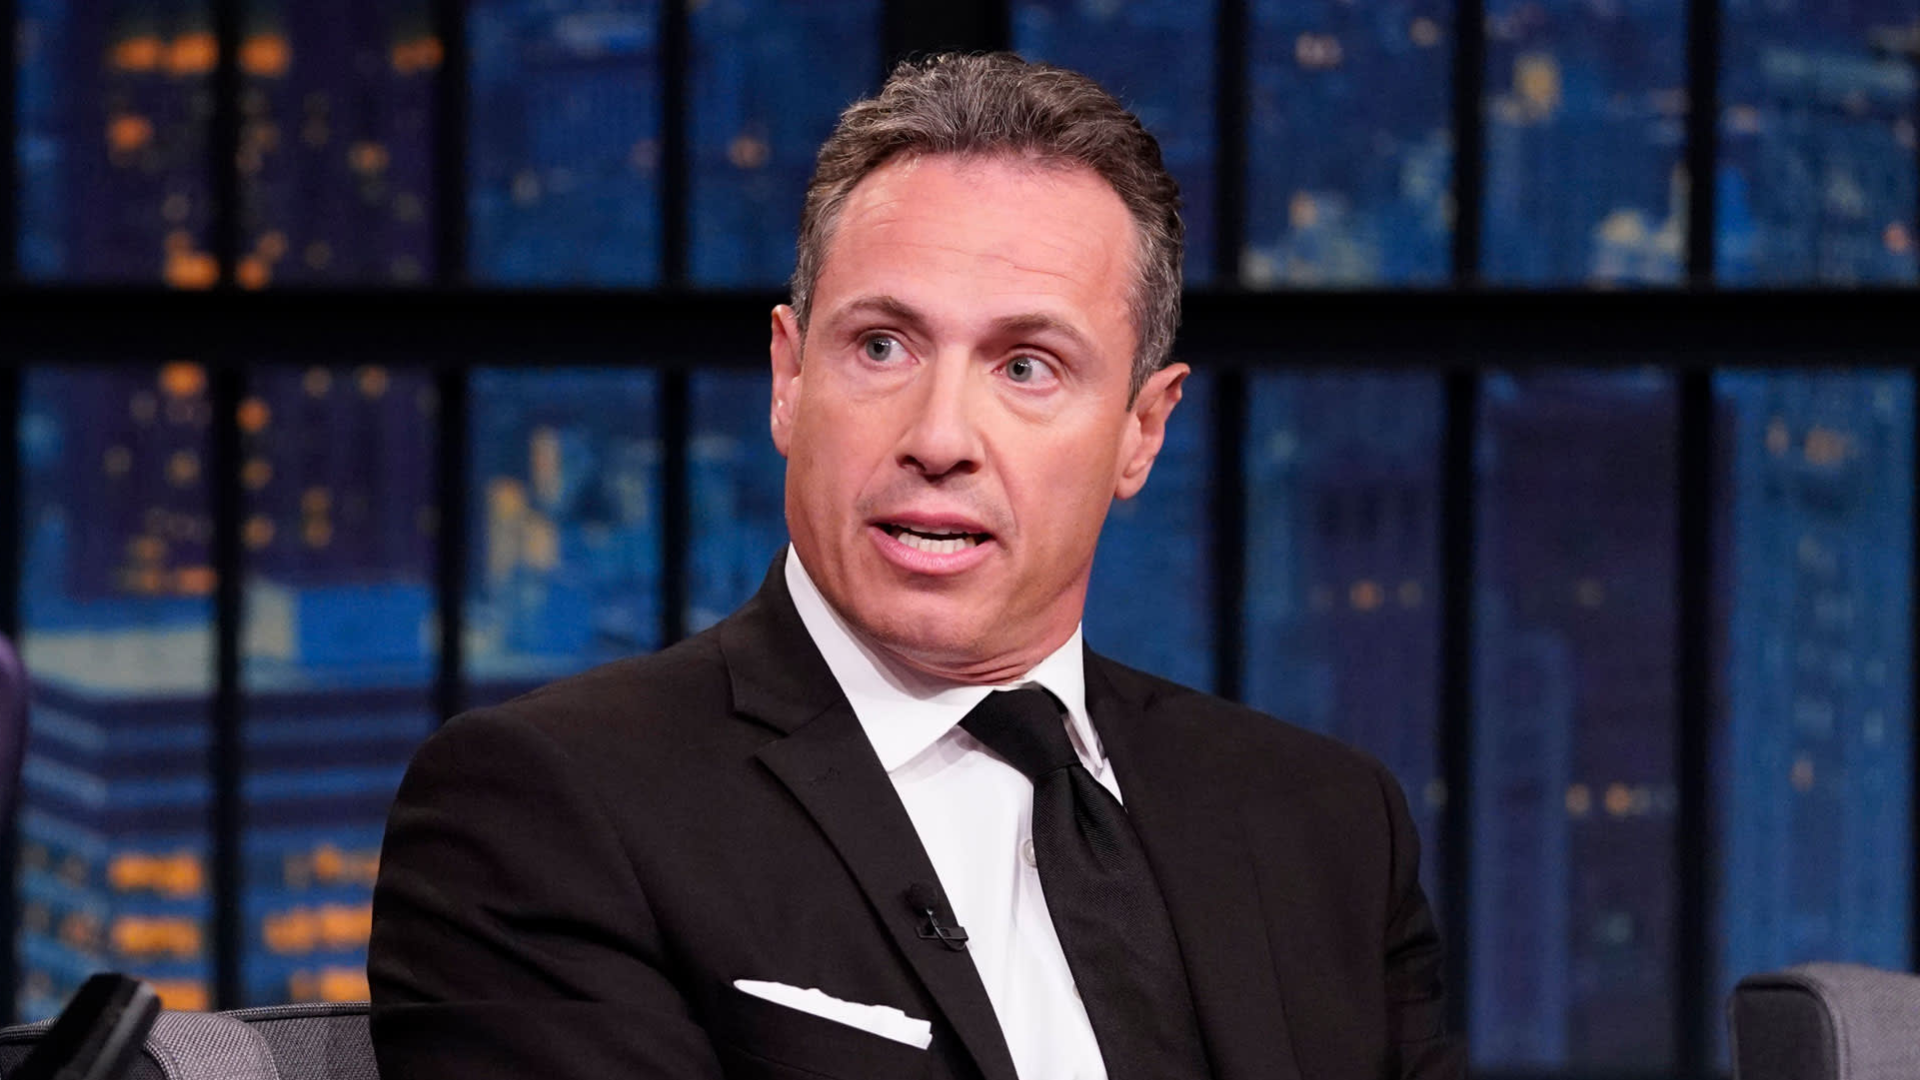 About Chris Cuomo's Wife And The Capitol Riots Debate